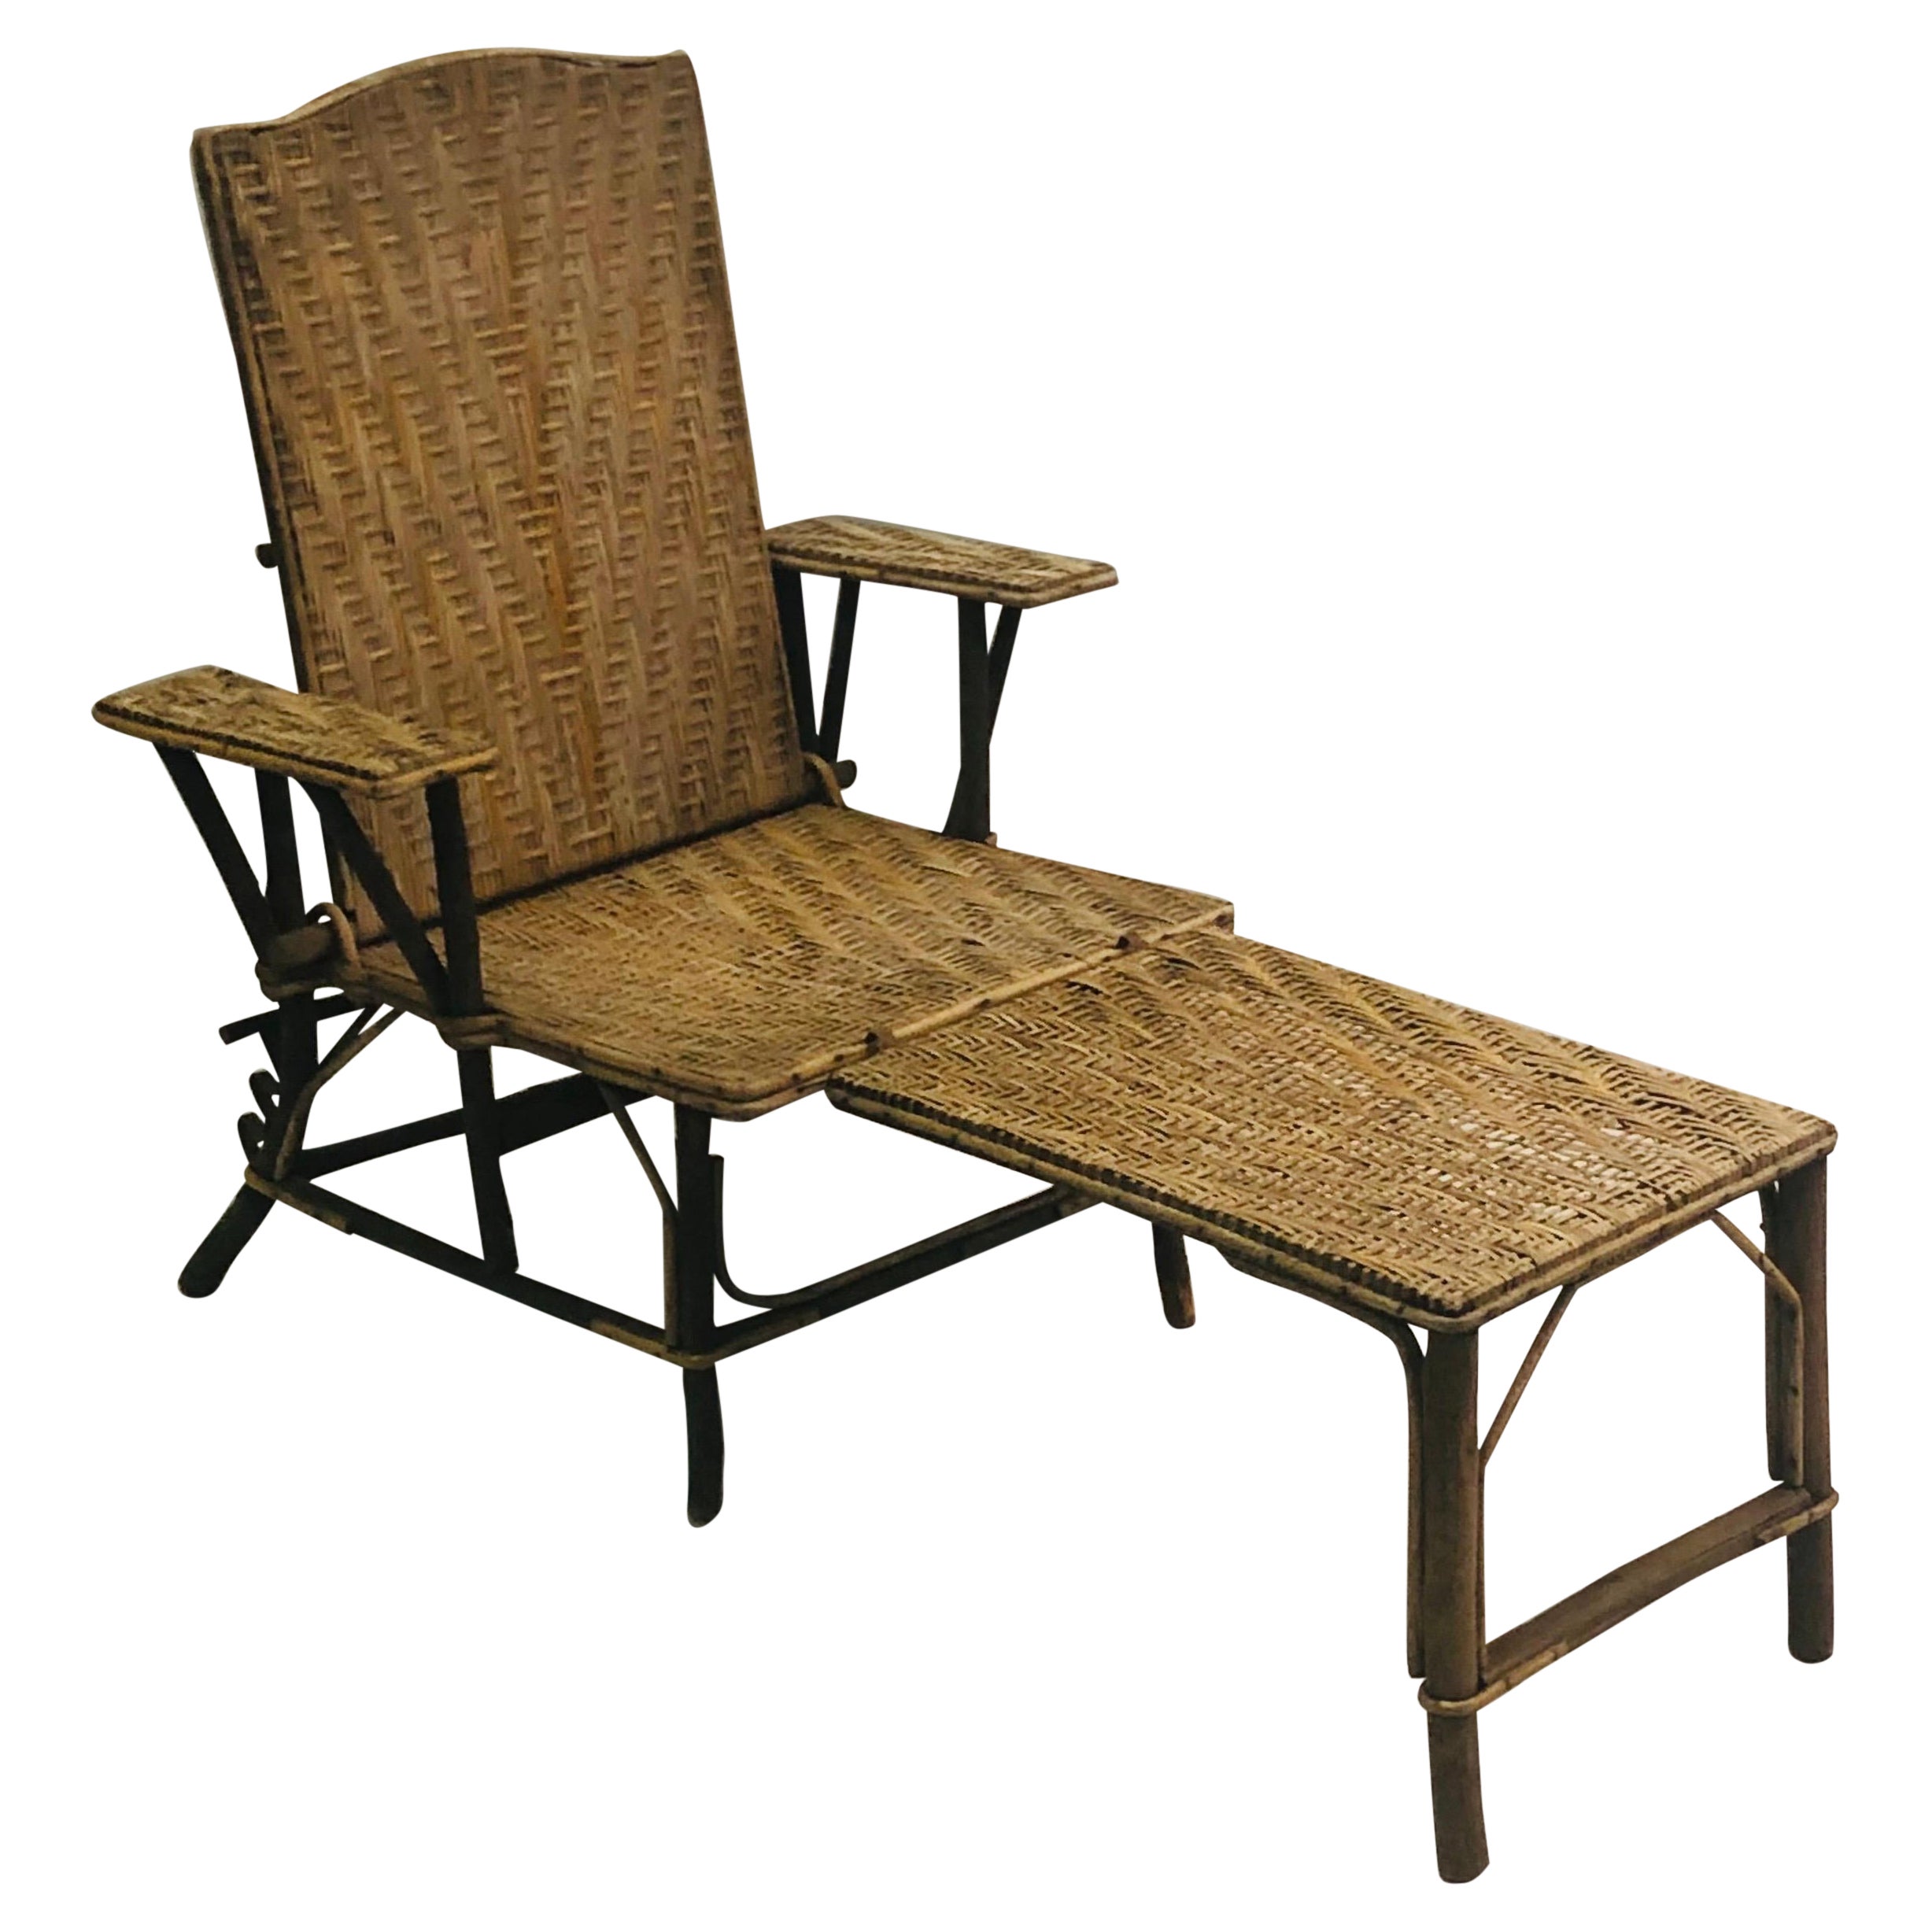 French Art Deco Rattan Lounge Chair / Recliner / Chaise Longue, 1920